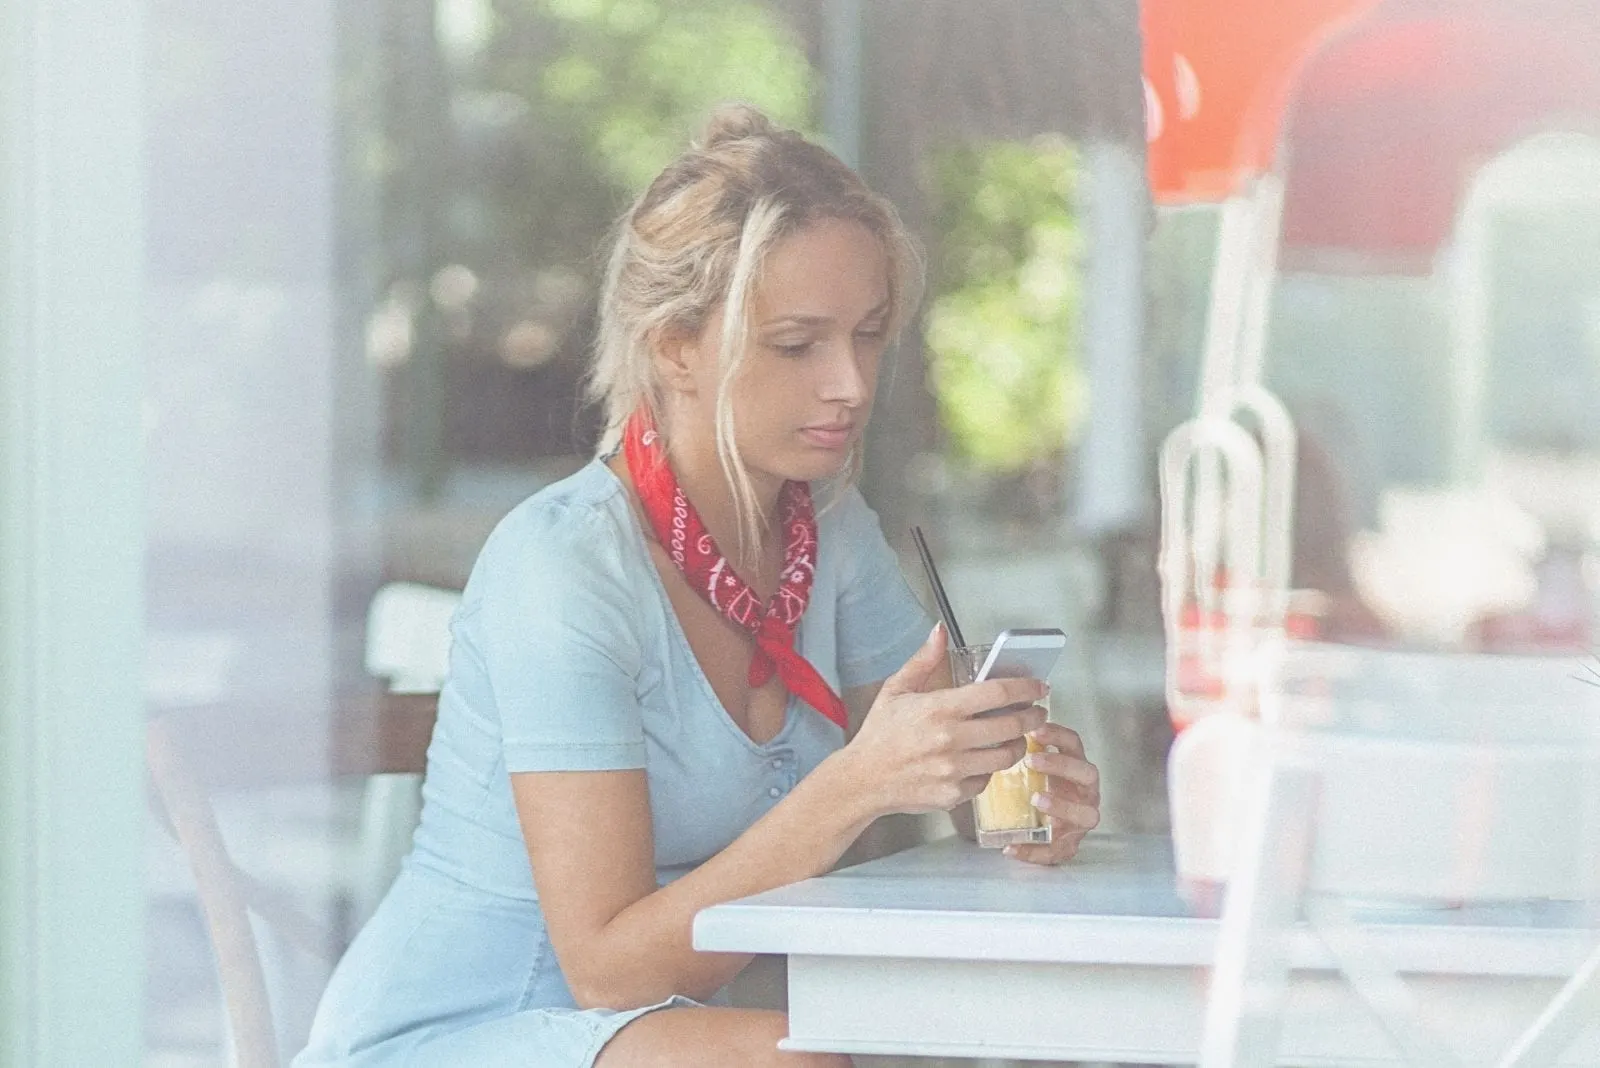 woman with a red scarf texting in her phone inside a cafe